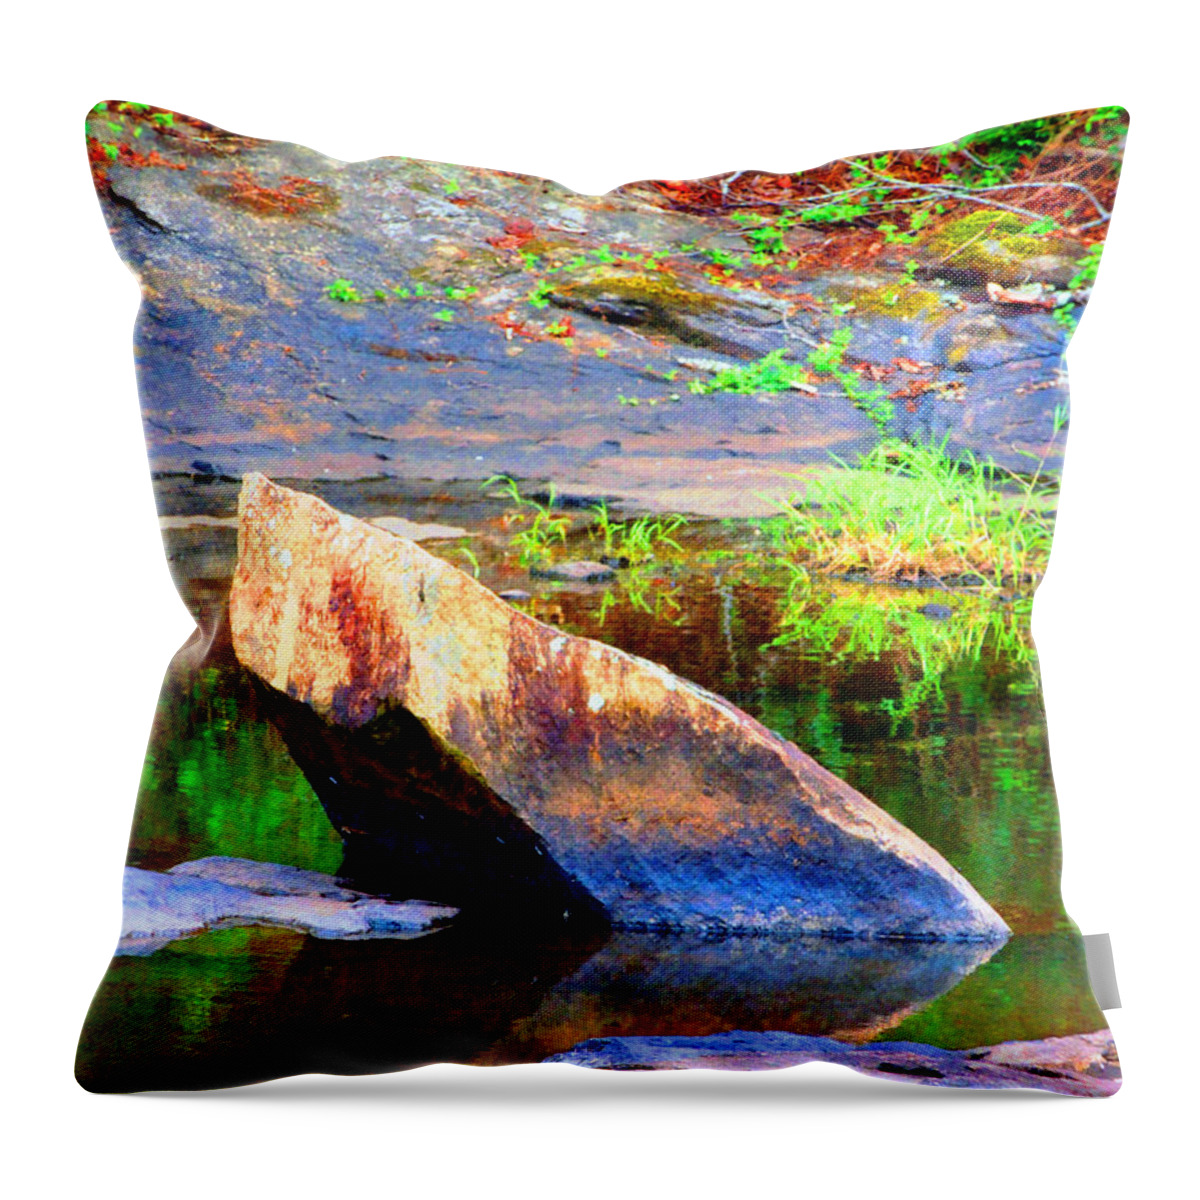 In Focus Throw Pillow featuring the photograph Abstact Rock				 by Aaron Martens